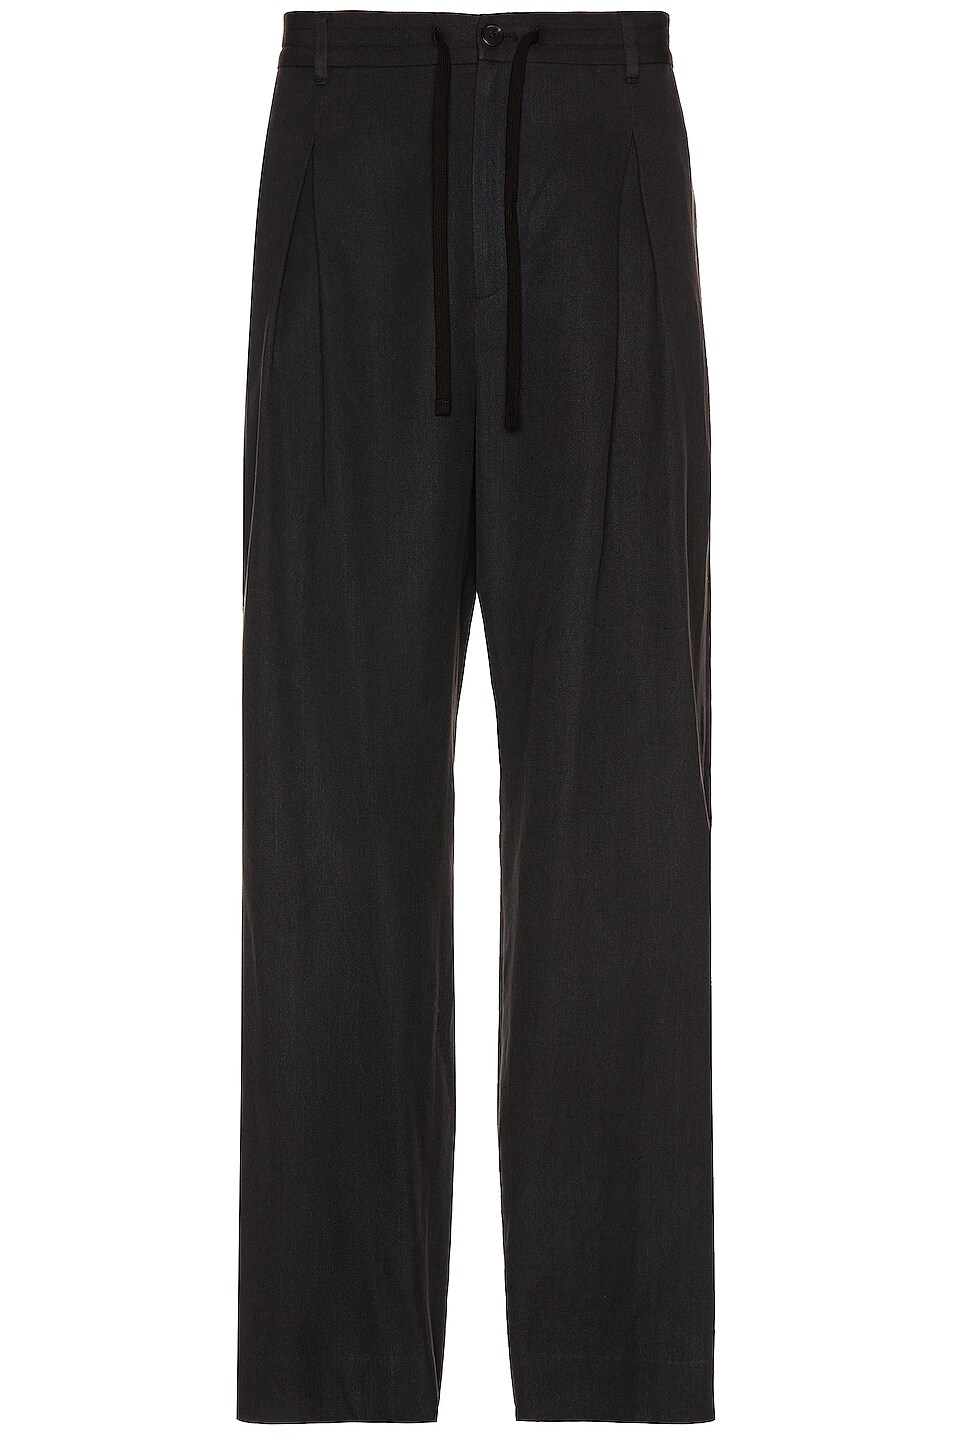 Image 1 of The Row Davian Pant in Black